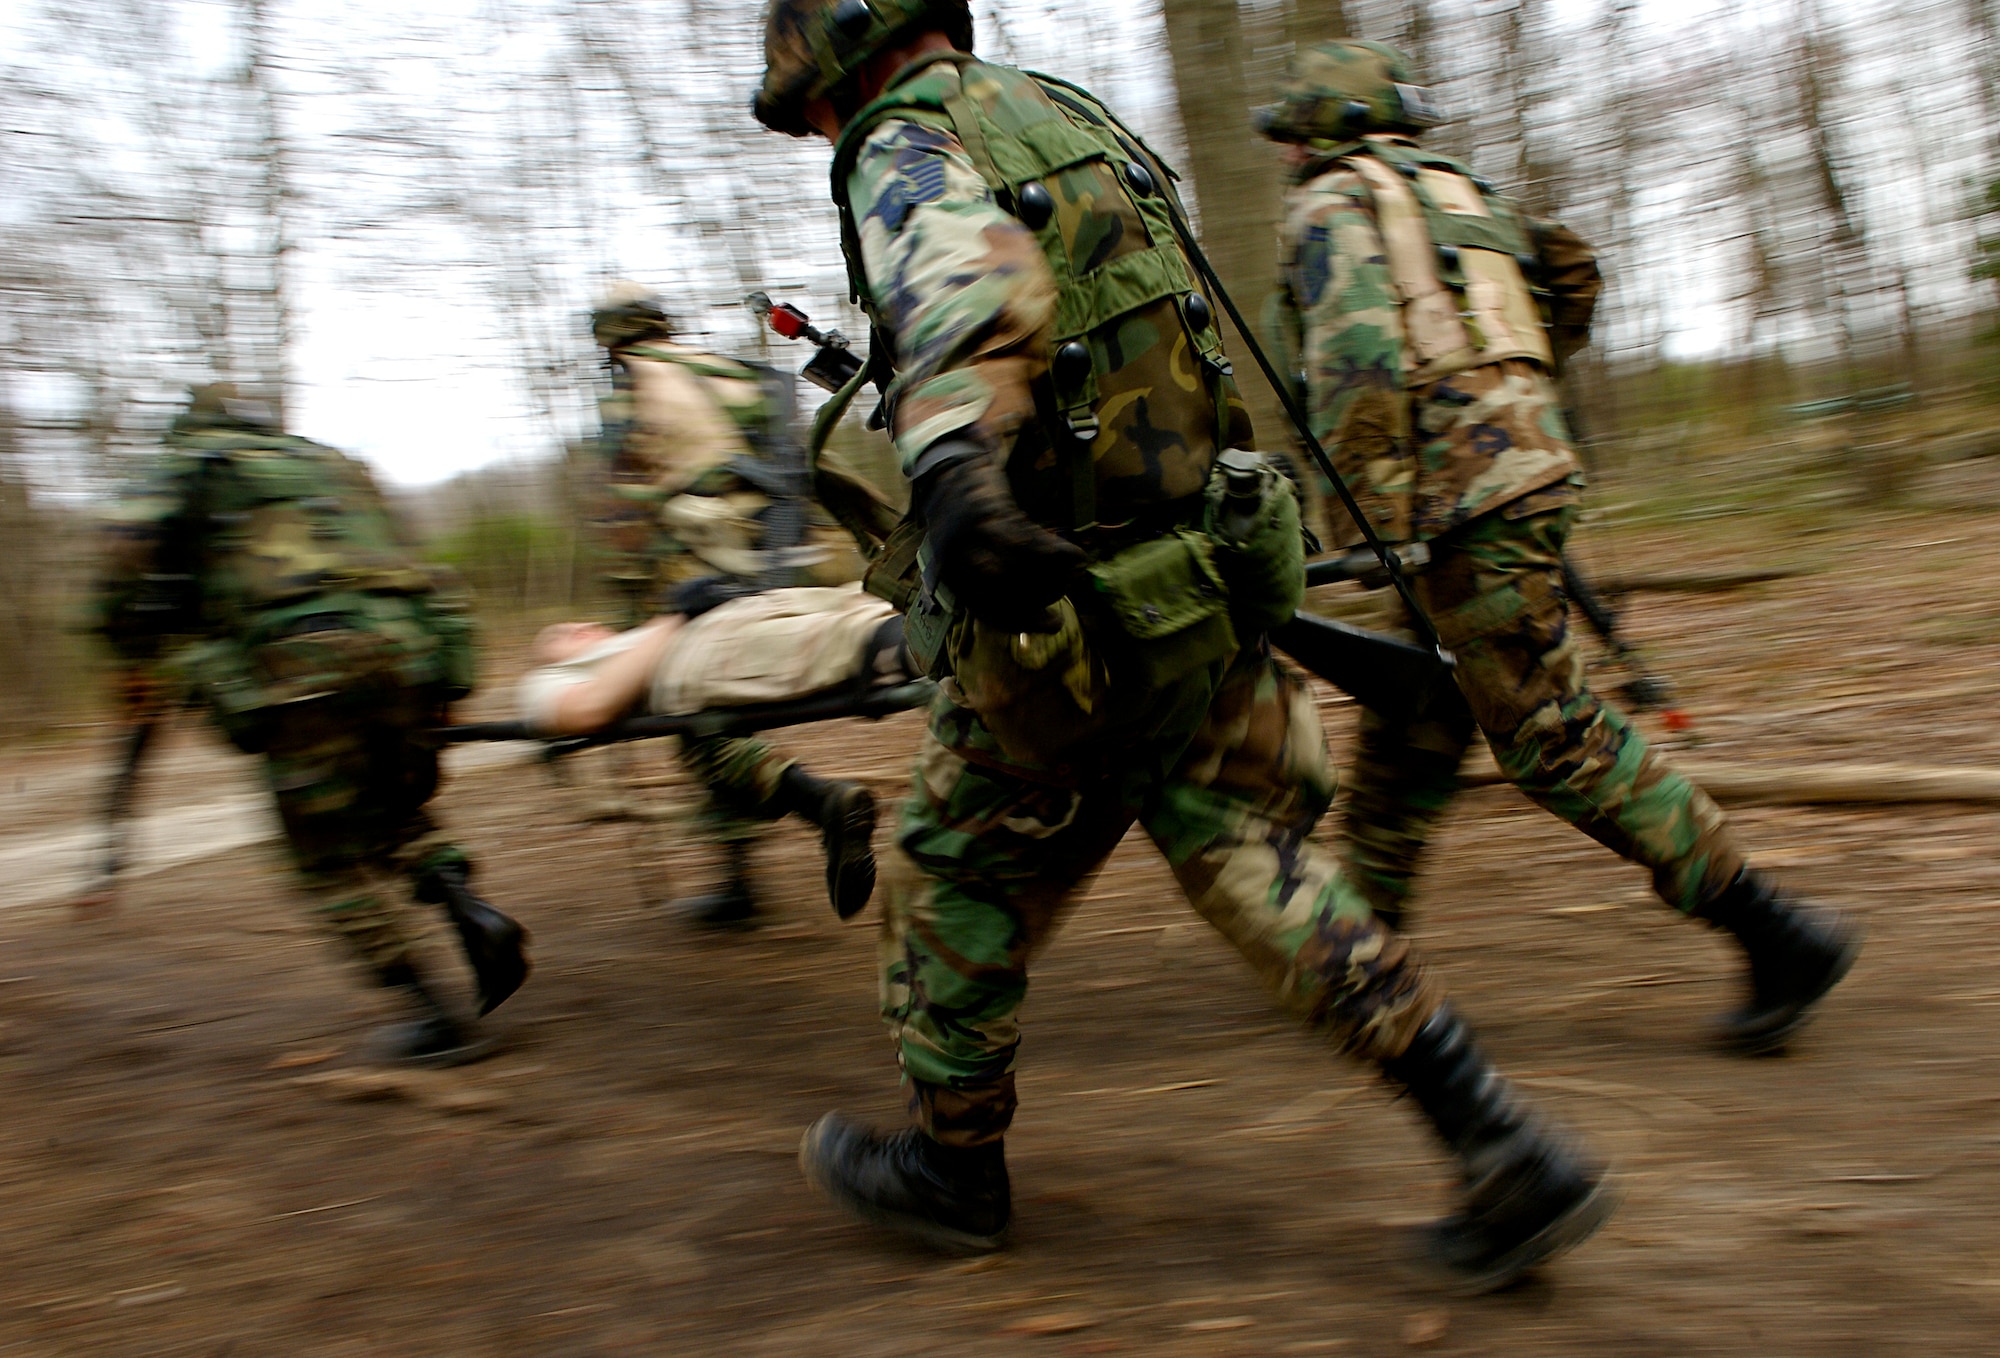 Staff Sgt. Aaron Mills (rear left), Senior Master Sgt. Robert Mayor (rear right) and Staff Sgt. Stephen Price (front right), all students  in Advanced Contingency Skills Training Course 08-4, carry a simulated wounded patient  to safety while taking incoming fire from opposing forces during the combat first aid portion of the ACST course on a Fort Dix, N.J., range April 11, 2008.  The course is taught by the U.S. Air Force Expeditionary Center's 421st Combat Training Squadron and prepares Airmen for upcoming deployments. (U.S. Air Force Photo/Staff Sgt. Samuel Rogers)